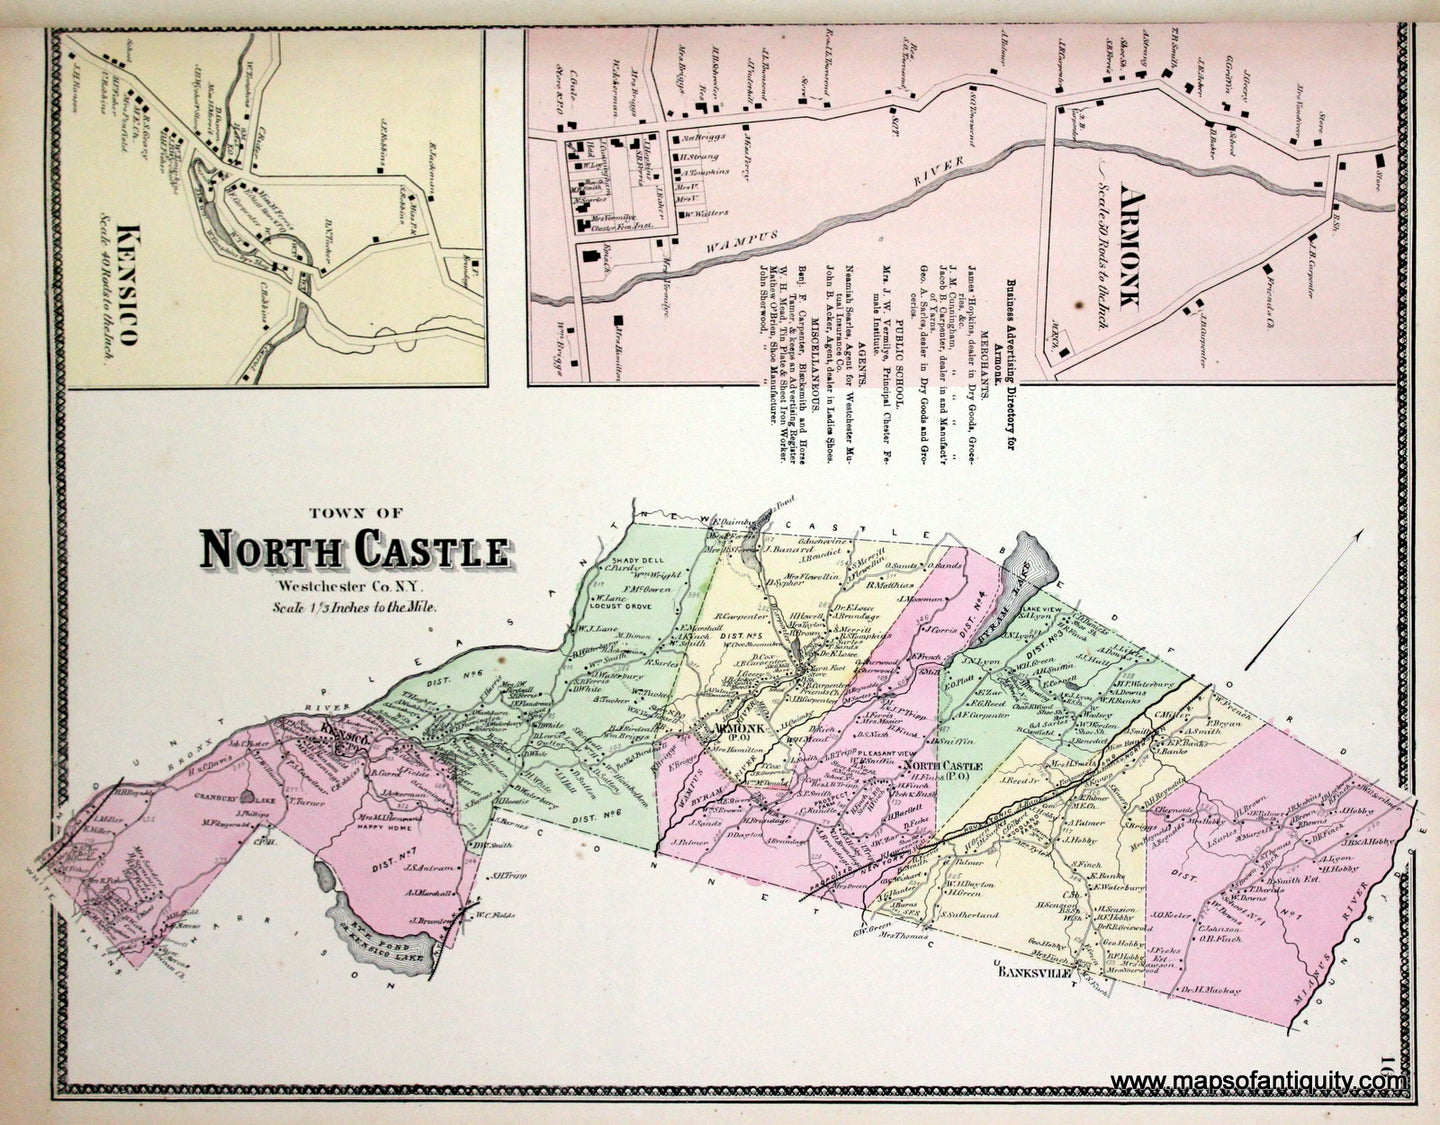 Antique-Hand-Colored-Map-Town-of-North-Castle-Westchester-Co.-N.Y.-(with-insets-of-Armonk-and-Kensico)-United-States-Northeast-1867-Beers-Maps-Of-Antiquity